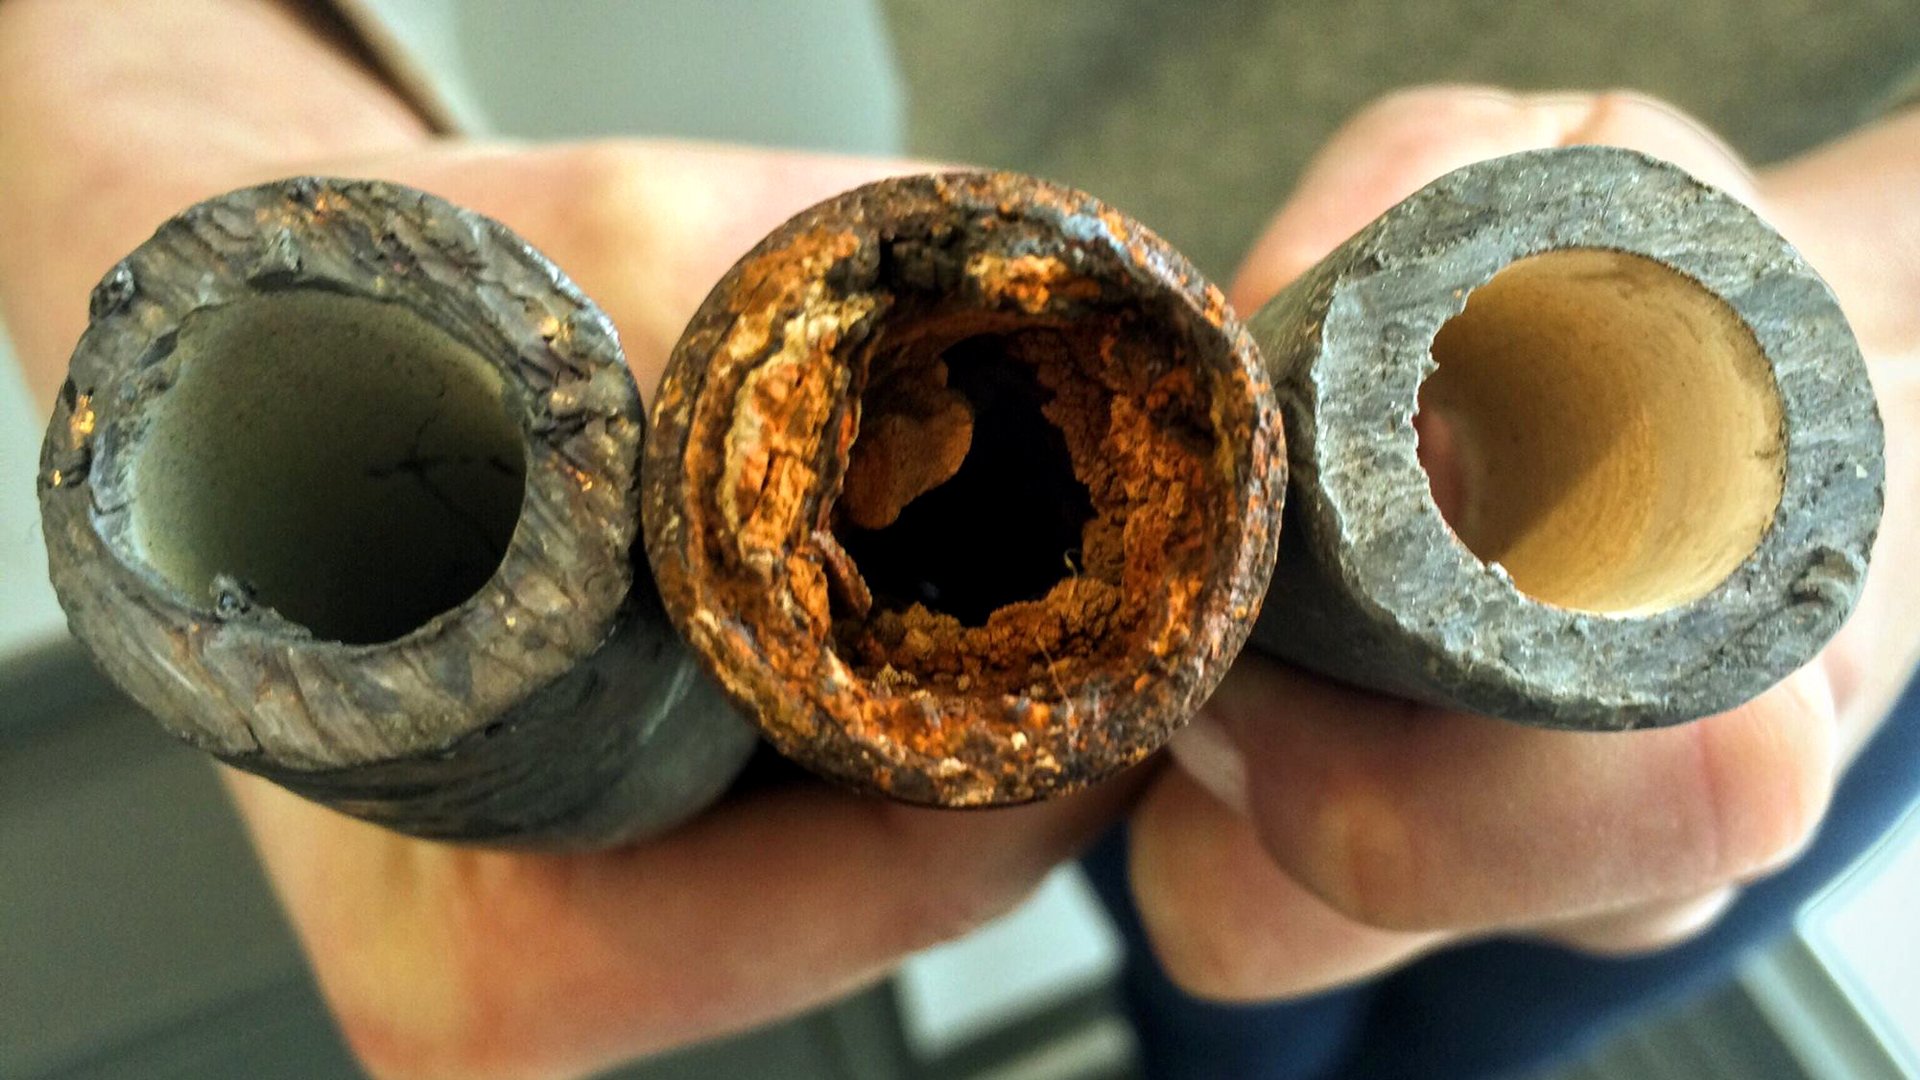 Corroded lead pipes